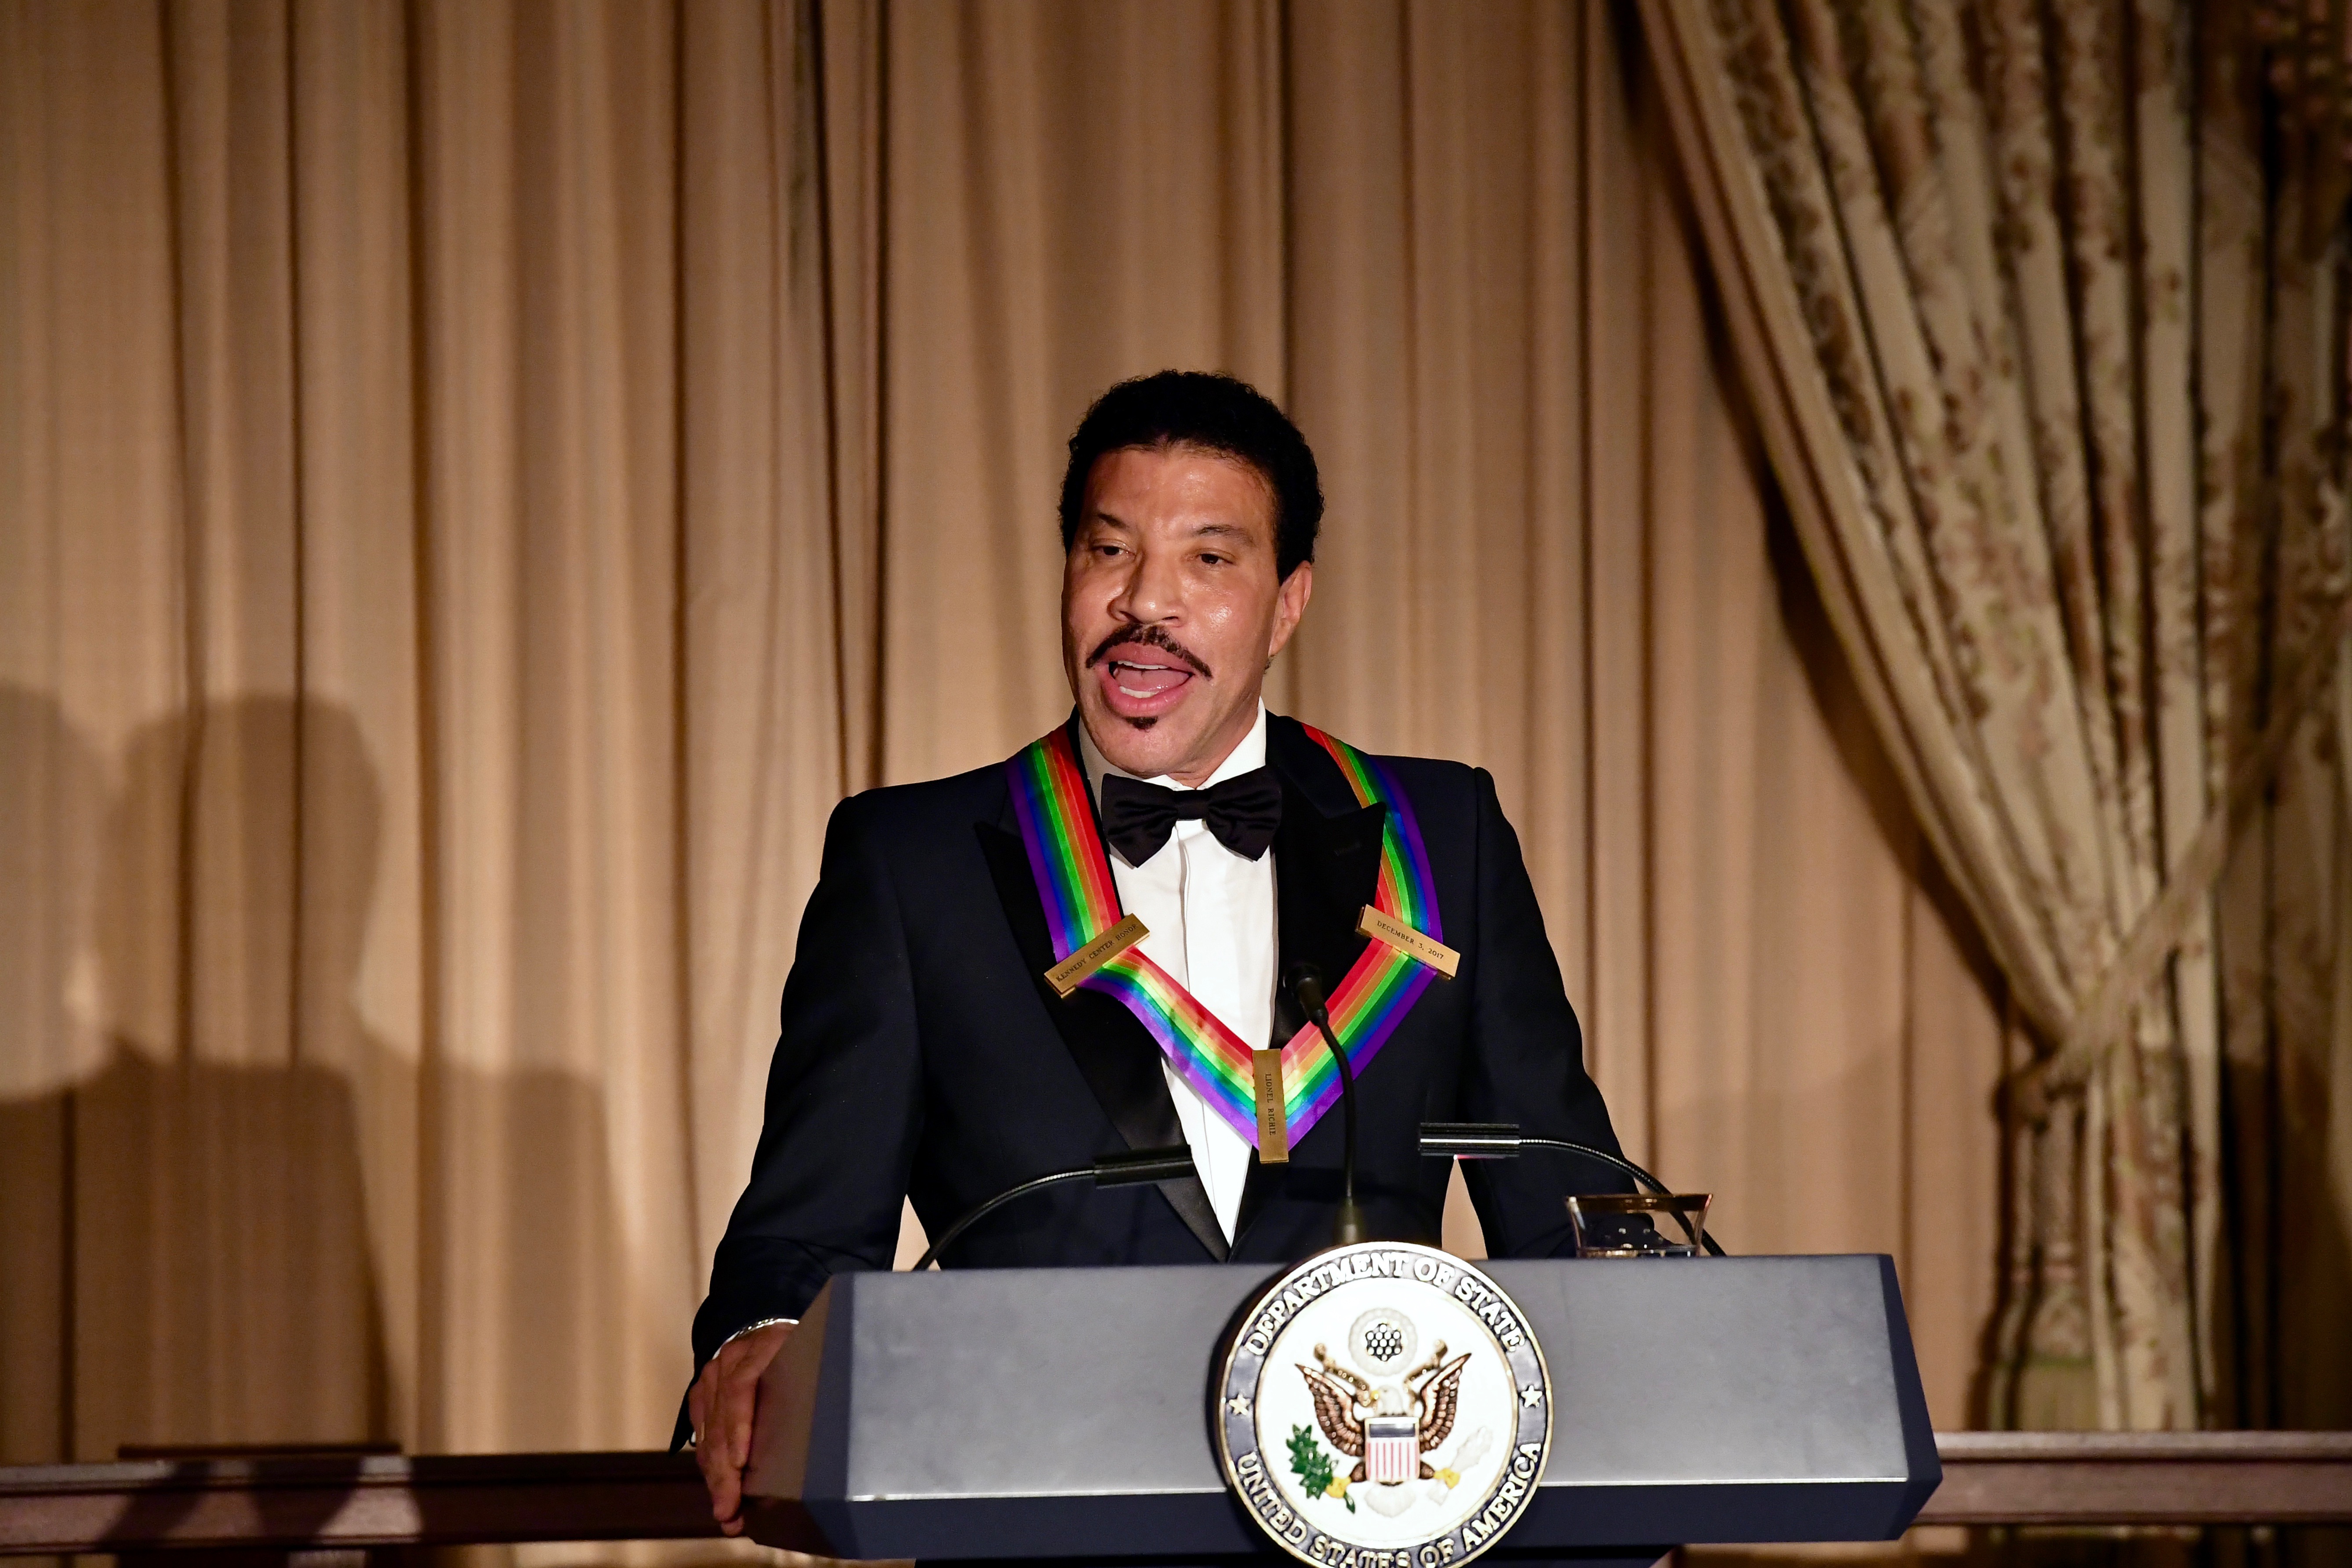 File Lionel Richie Delivers Remarks After Receiving His Kennedy Center Honor Medal 38833272341 Jpg Wikimedia Commons Tonton in tresor de la langue francaise informatise (the digitized treasury of the french language). wikimedia commons